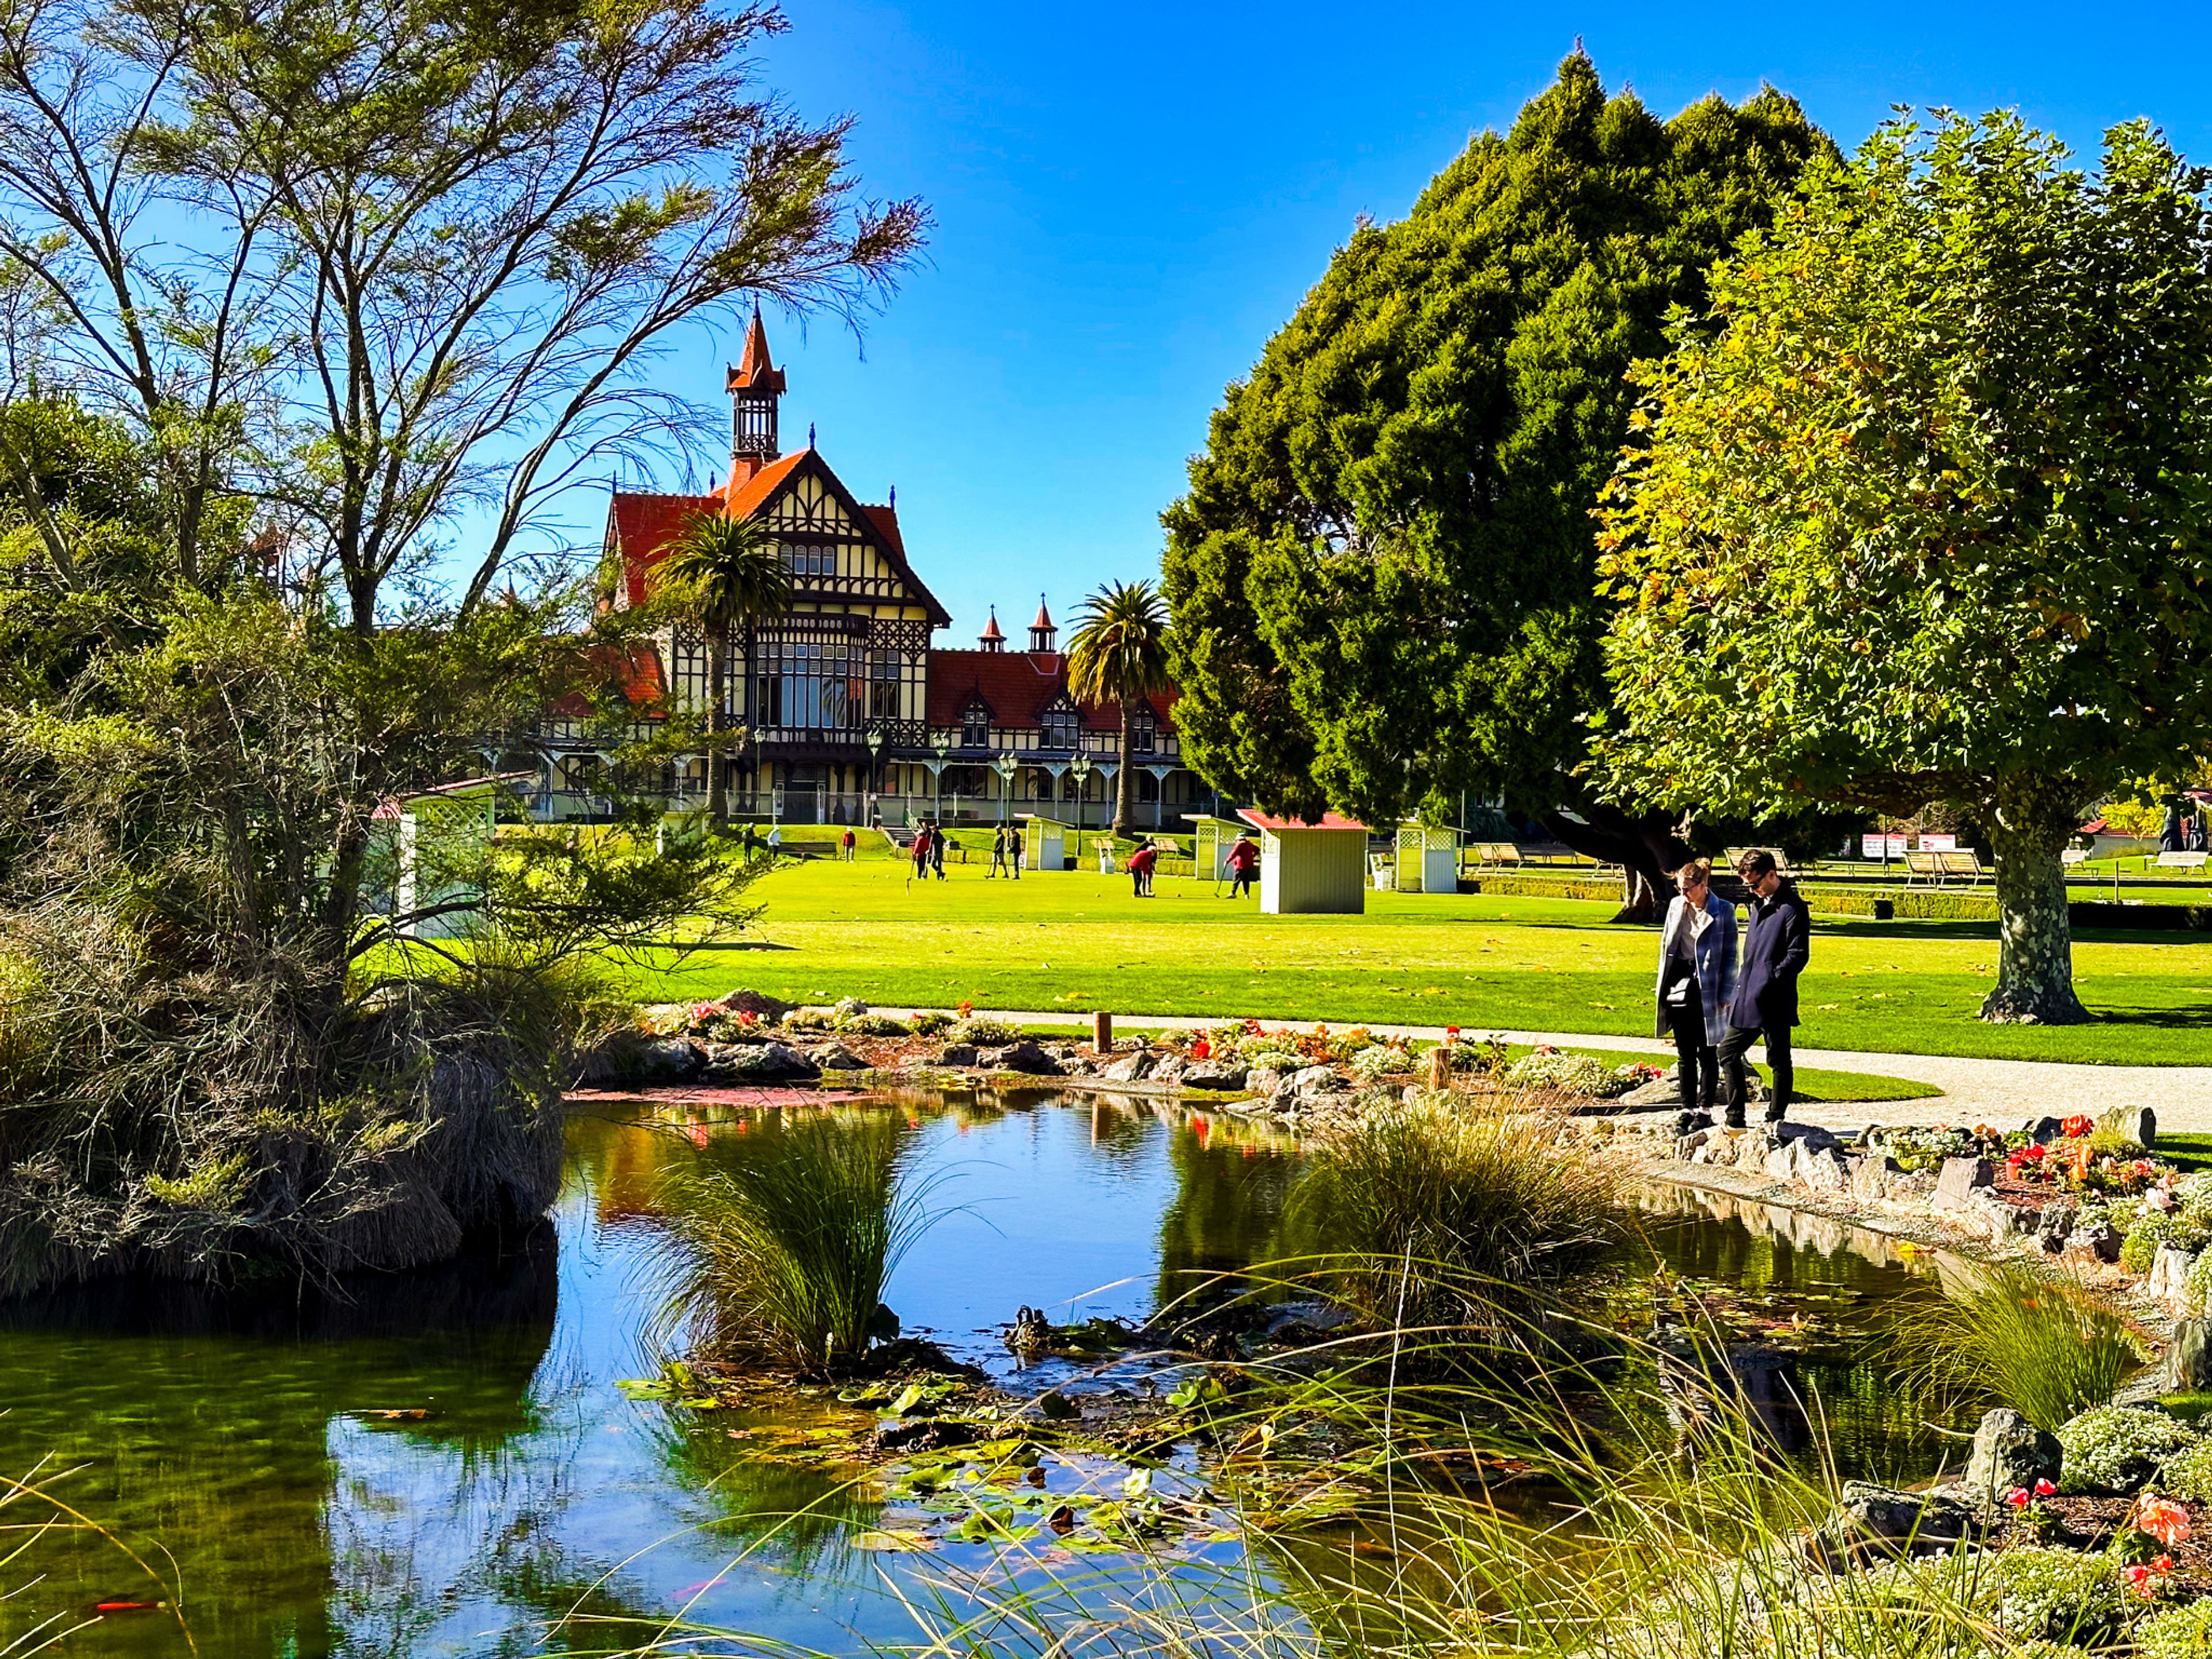 looking across one of the ponds to the Rotorua Meseum building